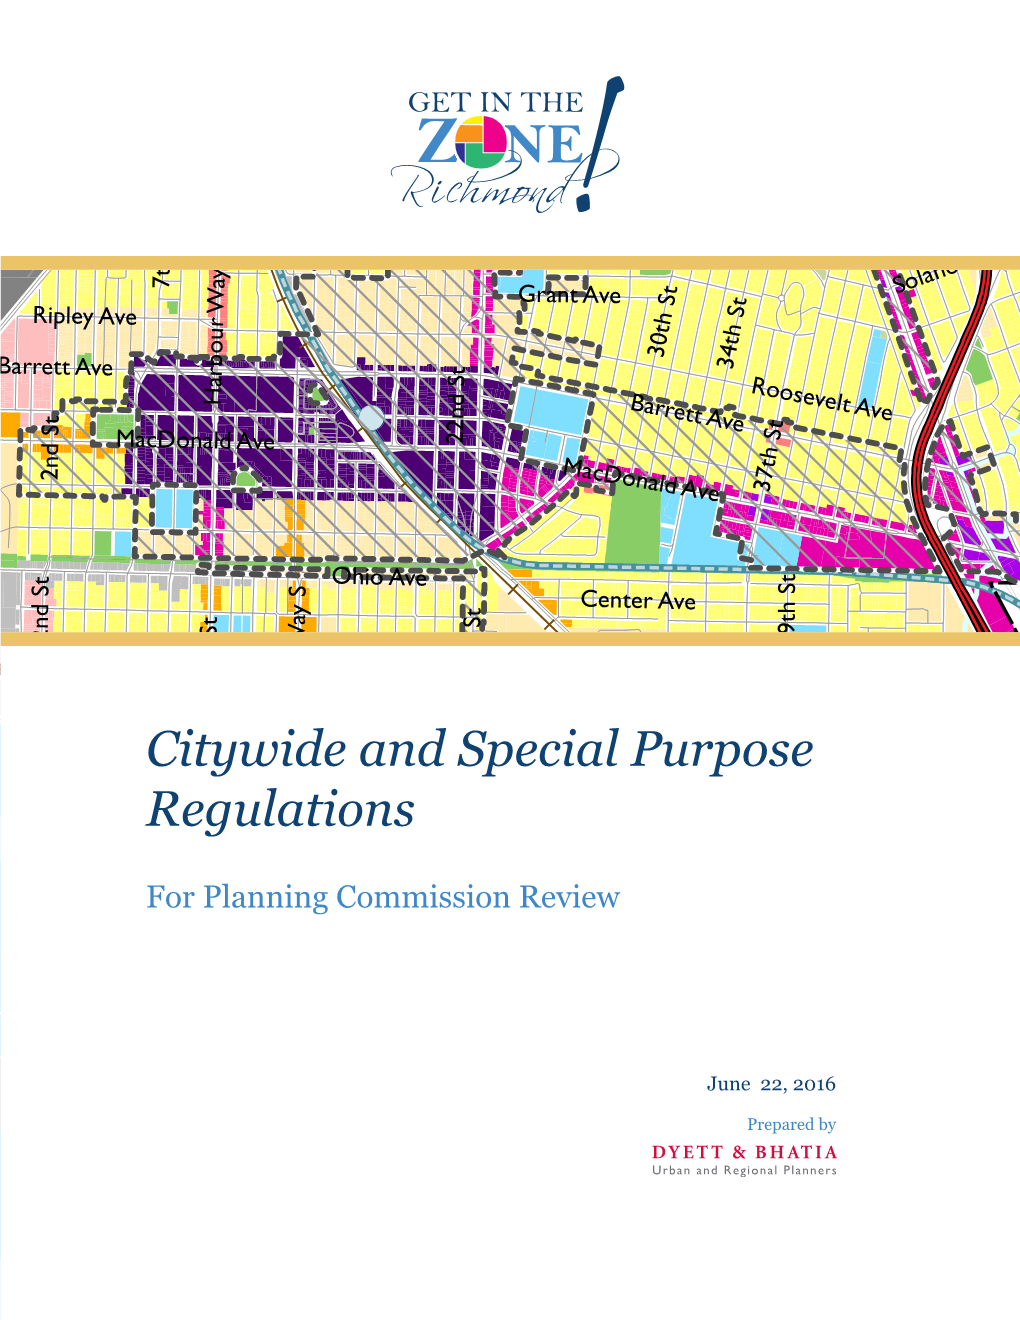 Citywide and Special Purpose Regulations for the Zoning Ordinance